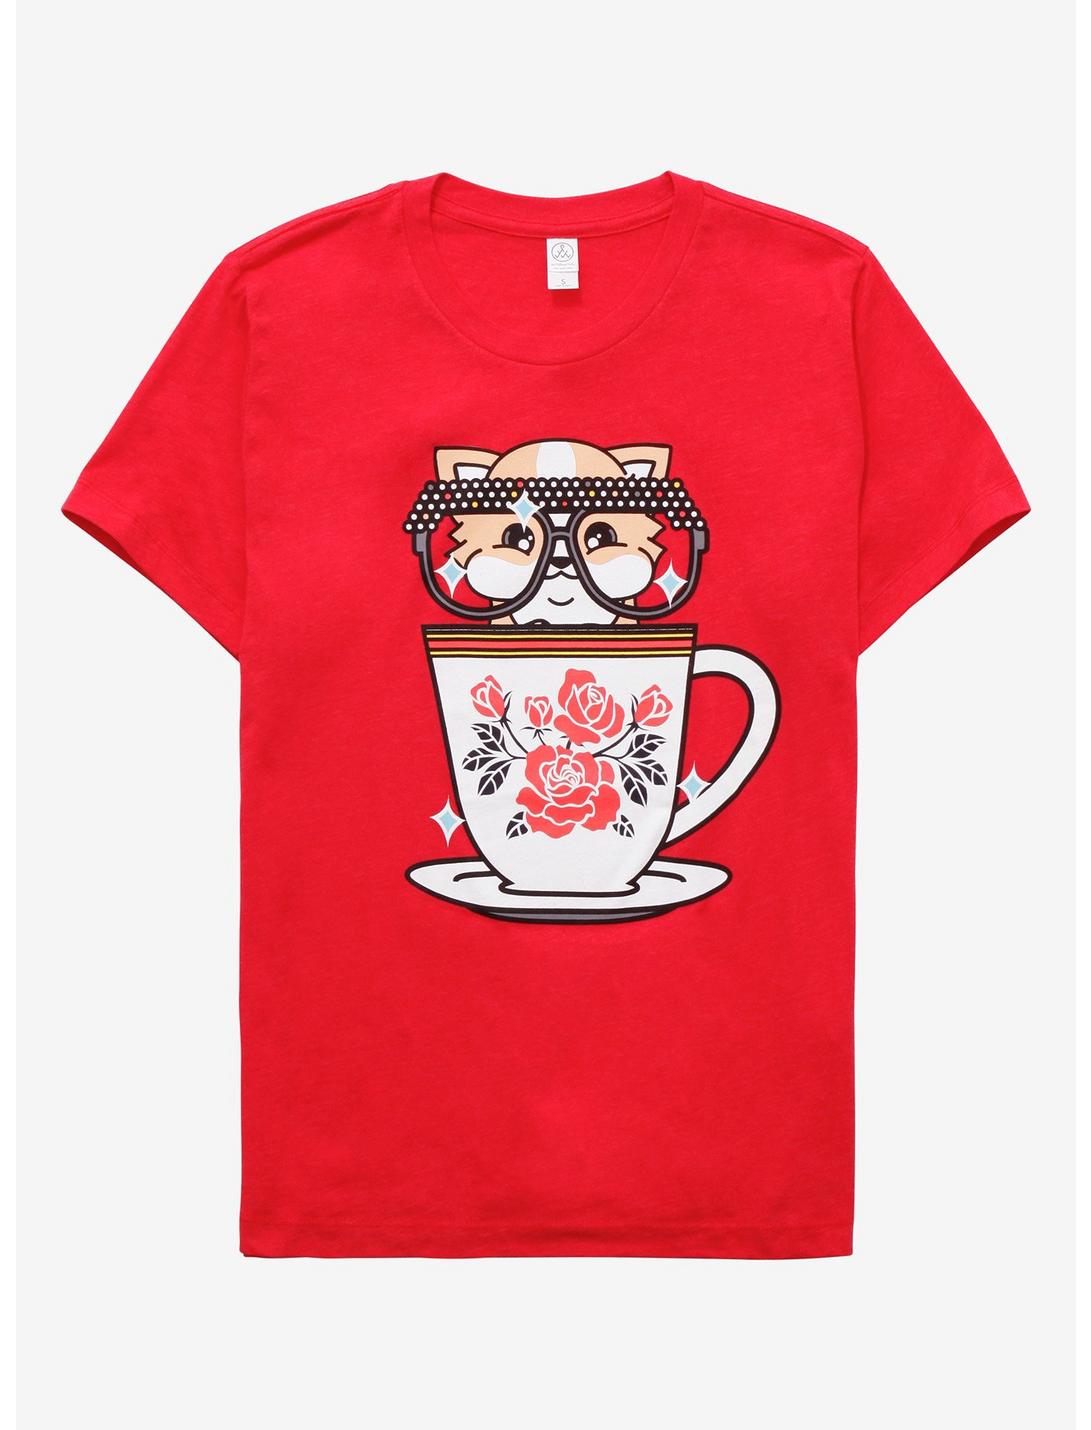 Corgi in a Teacup Women's T-Shirt - BoxLunch Exclusive, RED HEATHER, hi-res